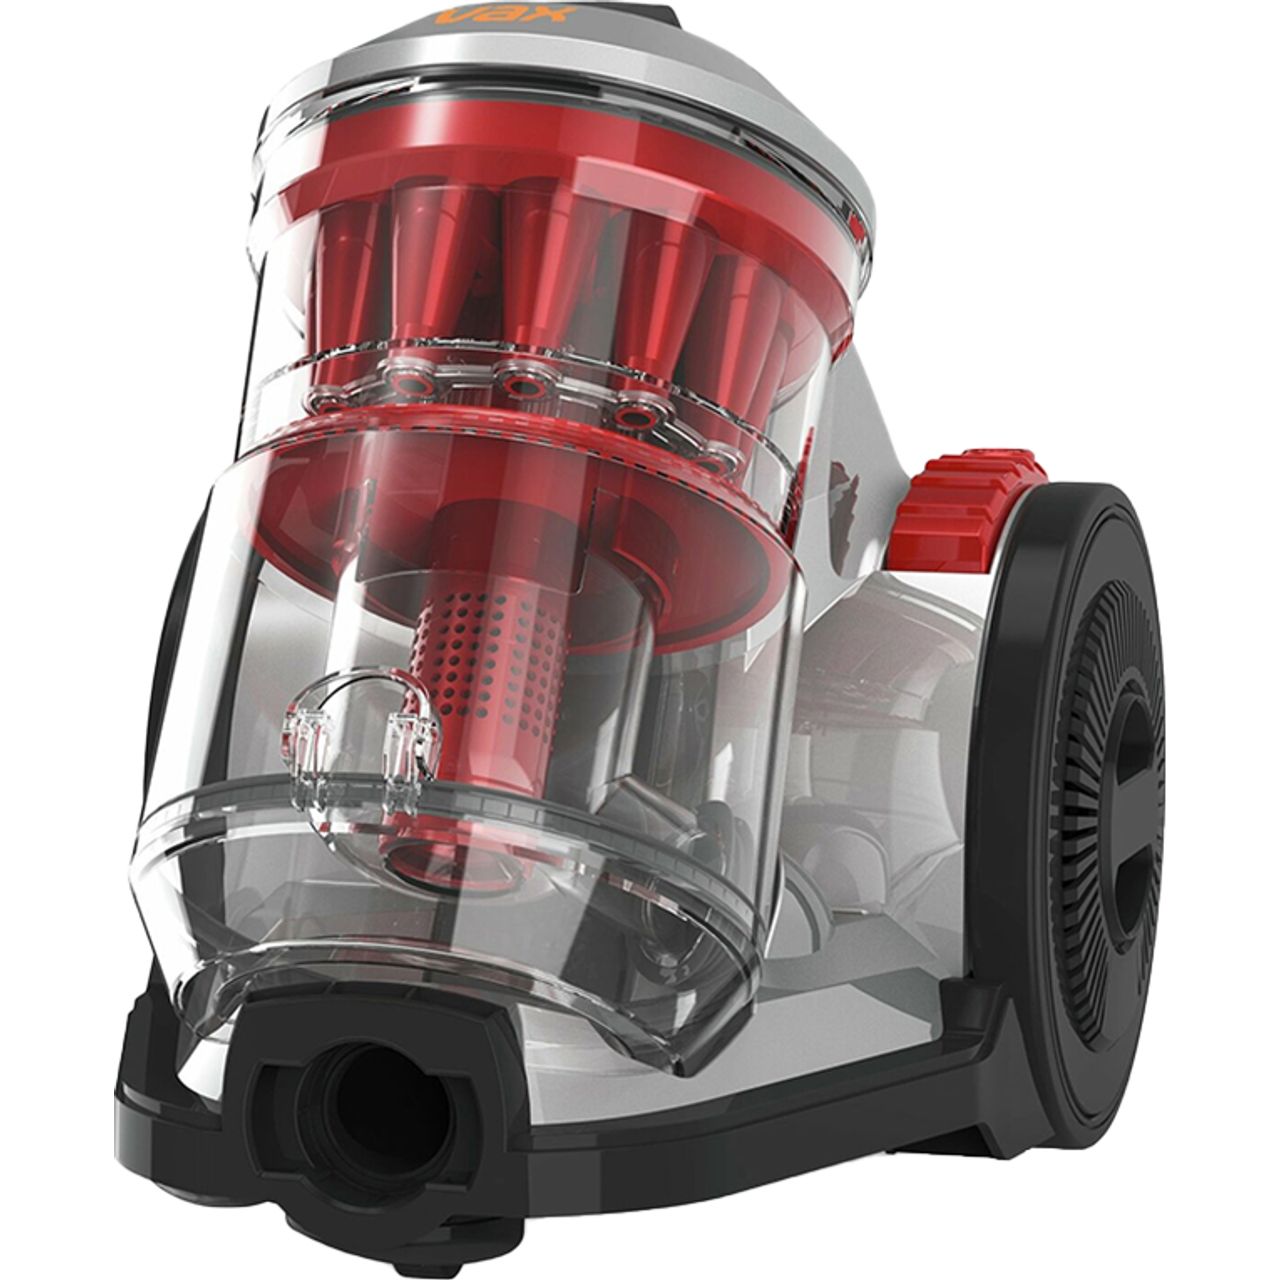 Vax Air Home CCQSAV1T1 Cylinder Vacuum Cleaner Review